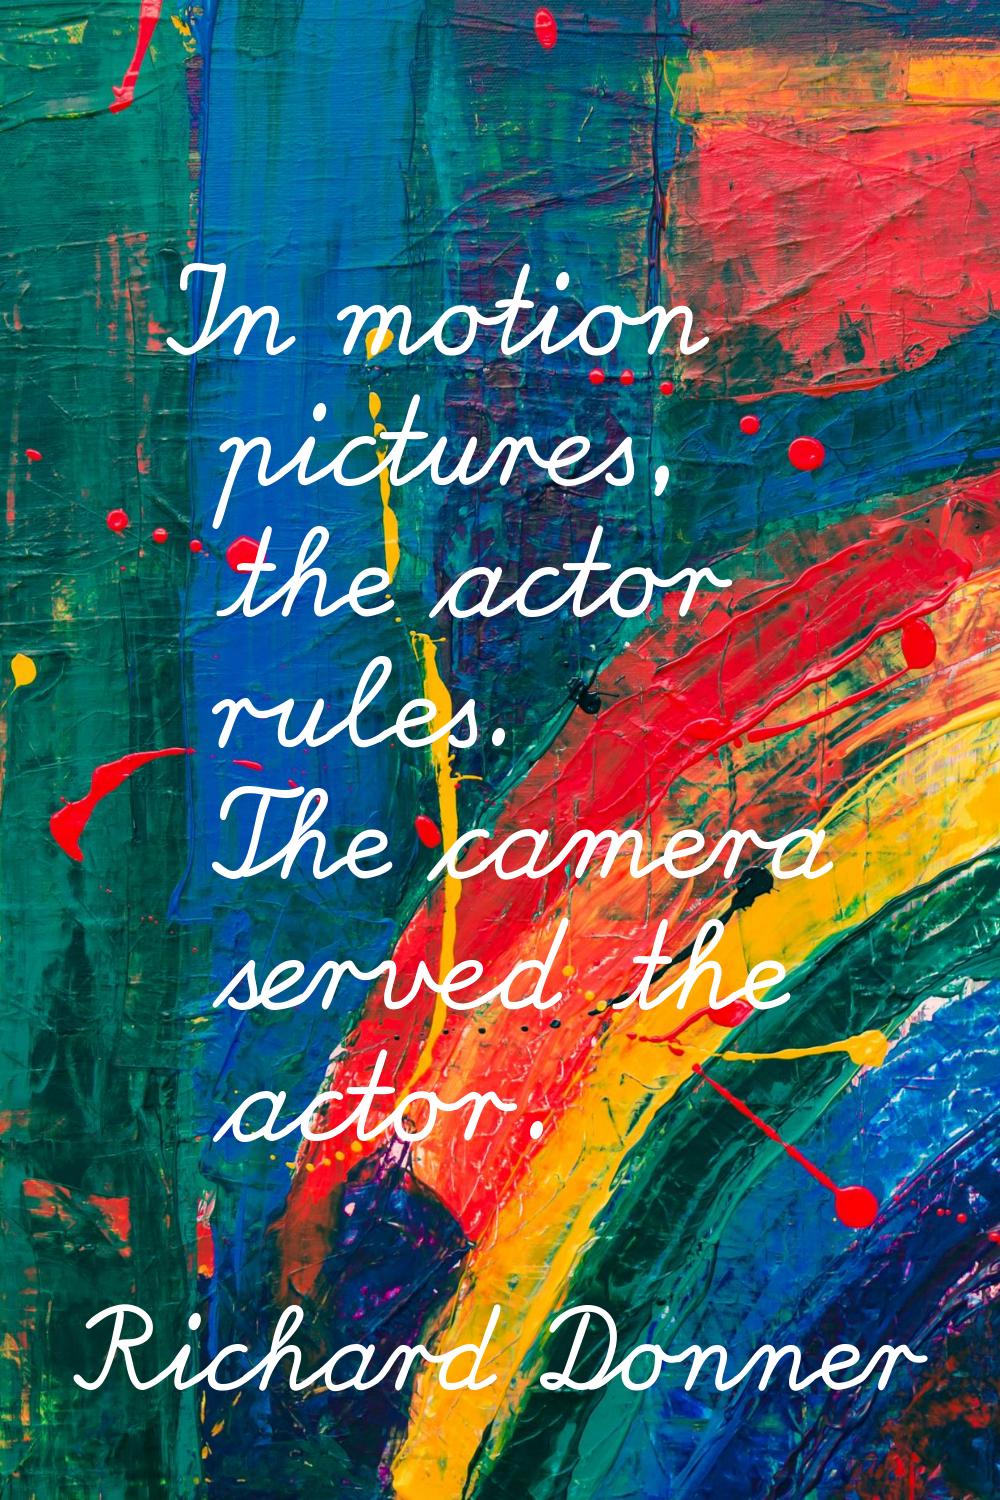 In motion pictures, the actor rules. The camera served the actor.